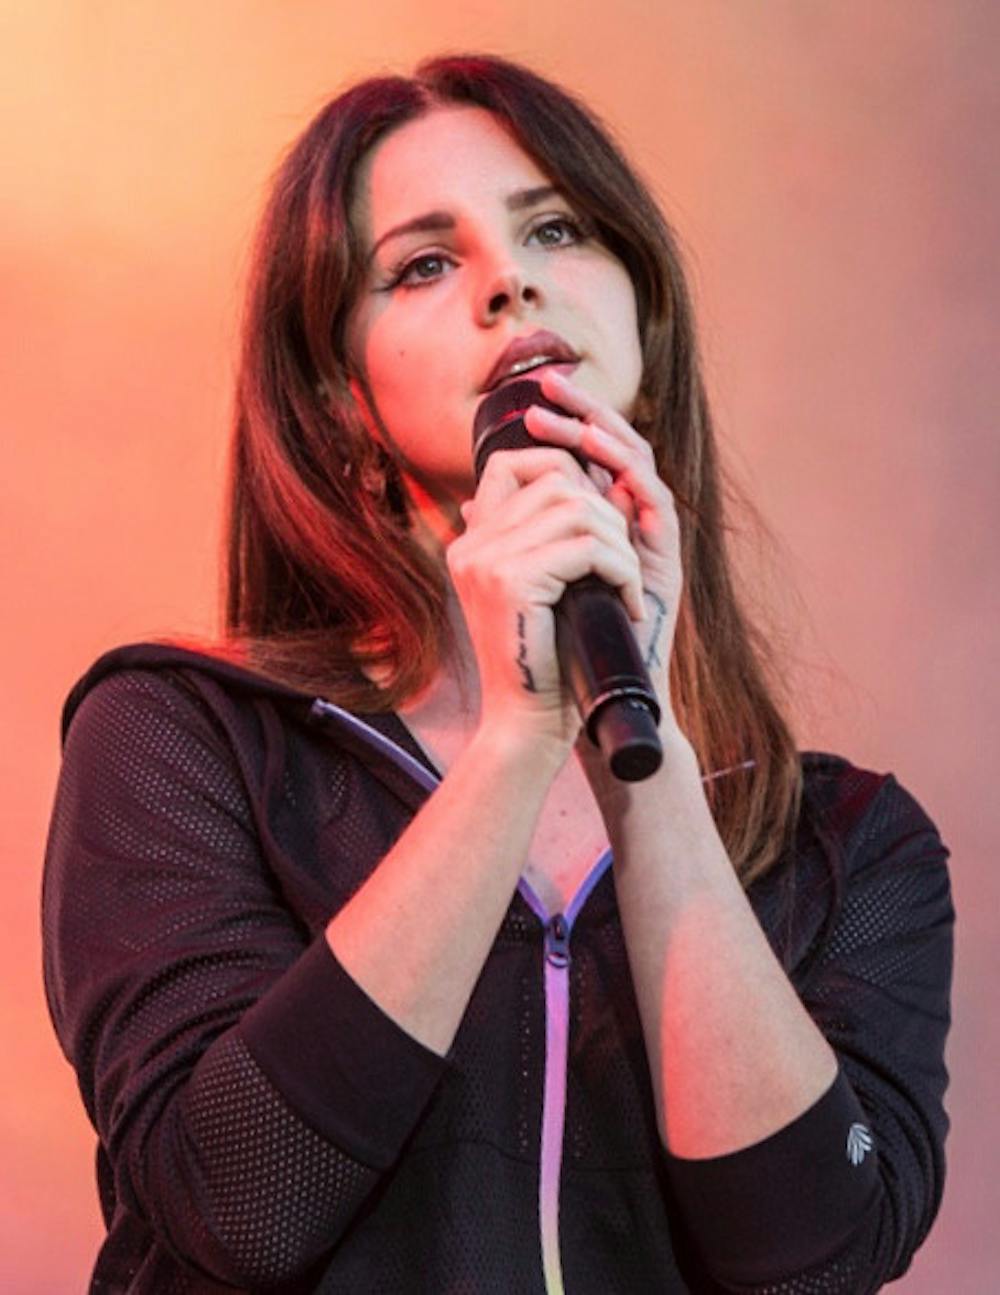 <p>Though many of the songs are indistinguishable from one another at first listen, Del Rey’s unpredictability adds an interesting dimension to the somber album. </p><p>Courtesy of Harmony Gerber.﻿</p><p><br/></p>